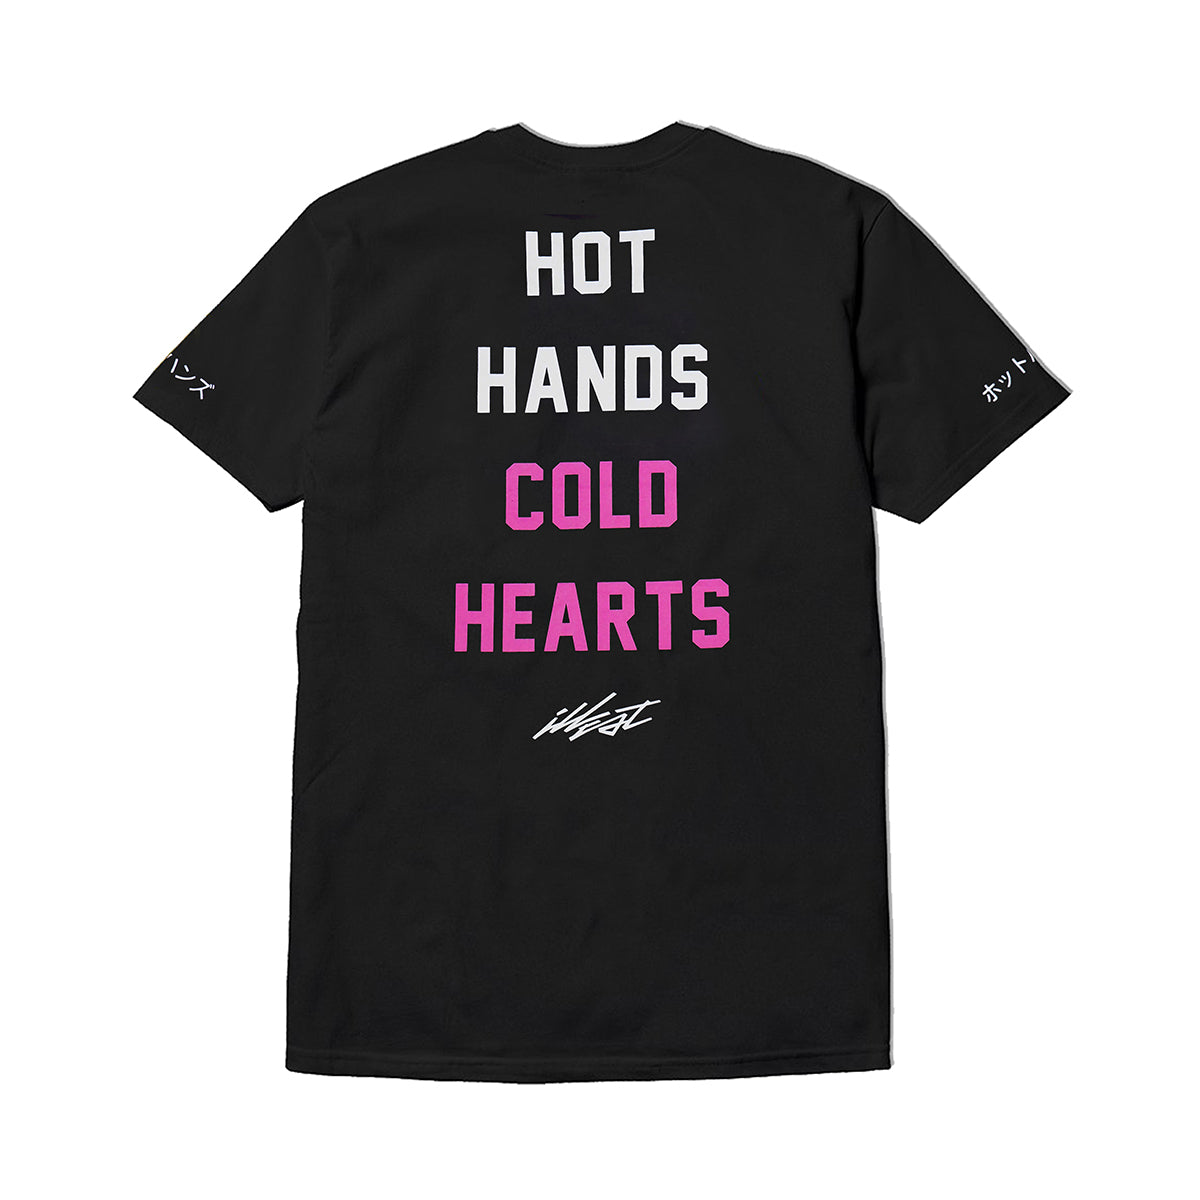 HOT HANDS COLD HEARTS TEE - BLACK